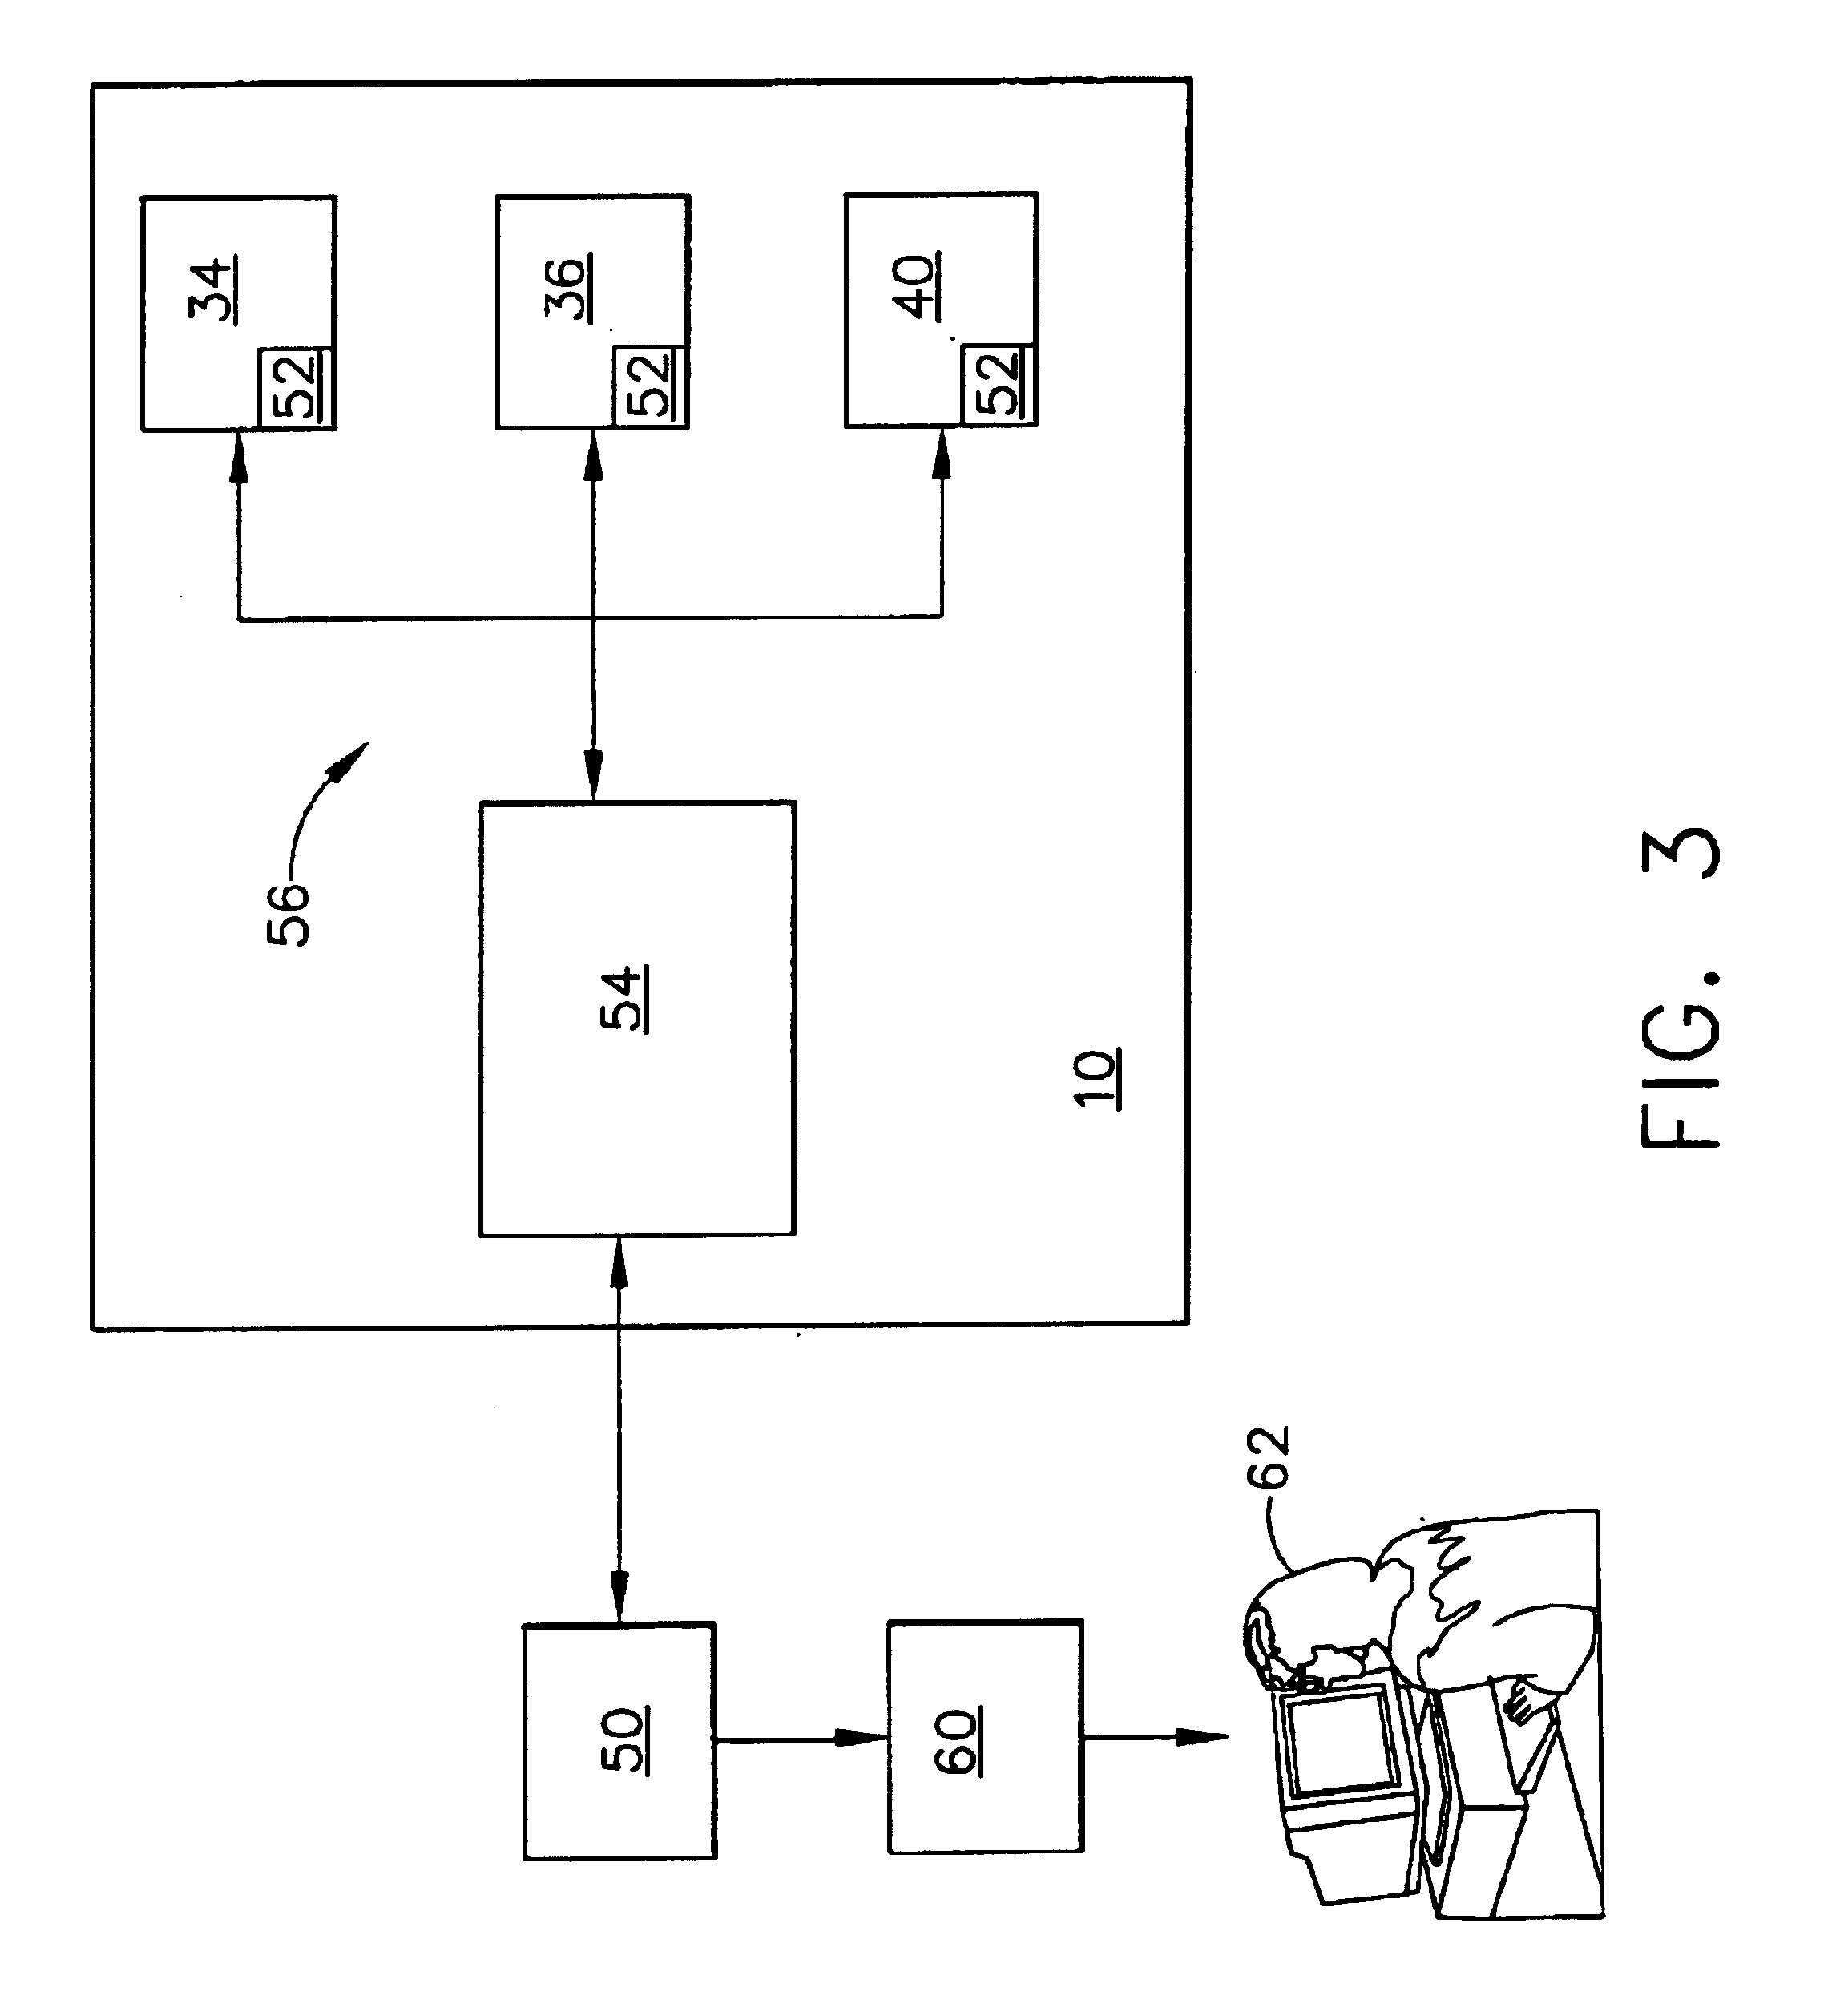 System and method for performance monitoring of operational equipment used with machines